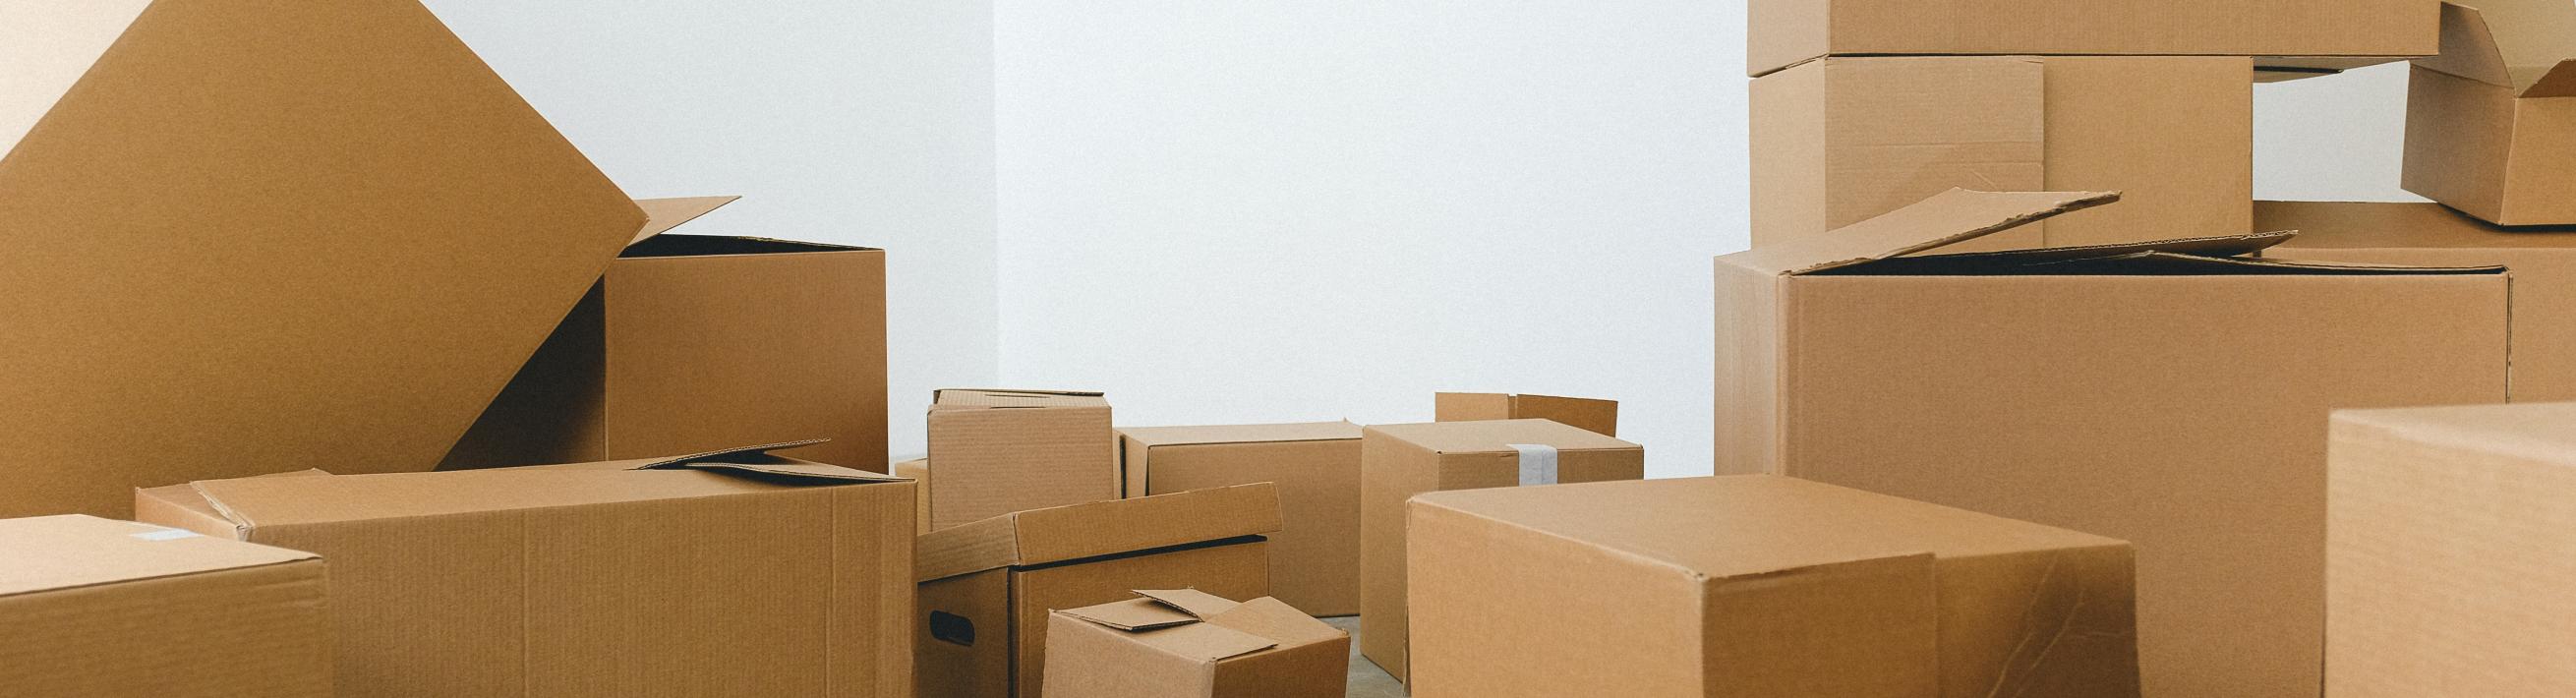 Boxes of various sizes in a room.